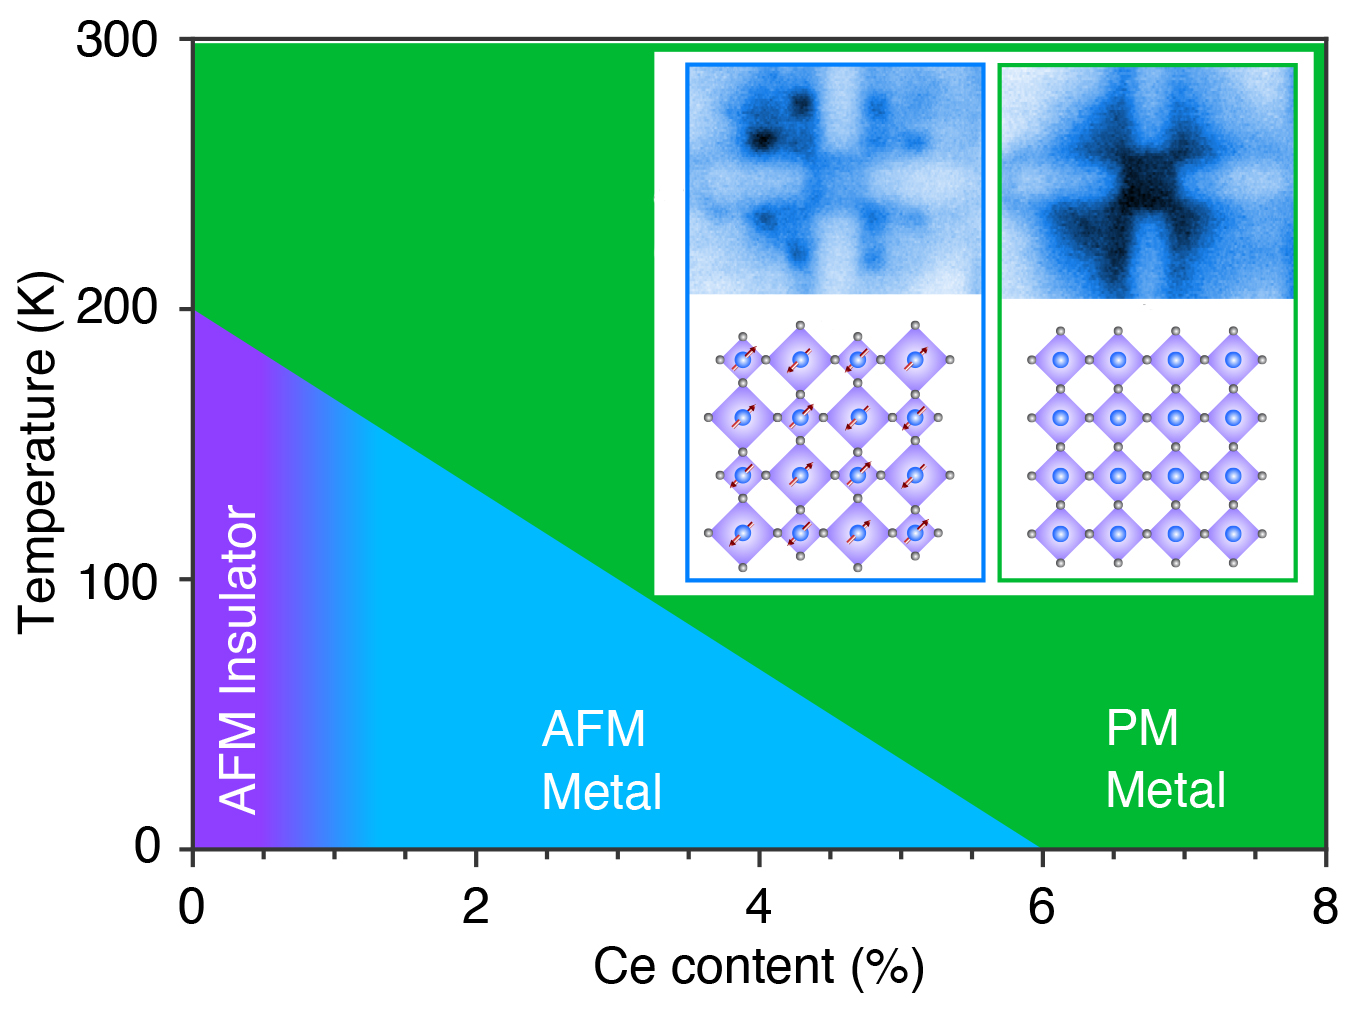 Phase diagram (temperature vs Ce content) showing regions labeled “AFM Insulator” (purple), “AFM Metal” (blue), and “PM metal” (green). Inset shows ARPES data and corresponding crystal structures.